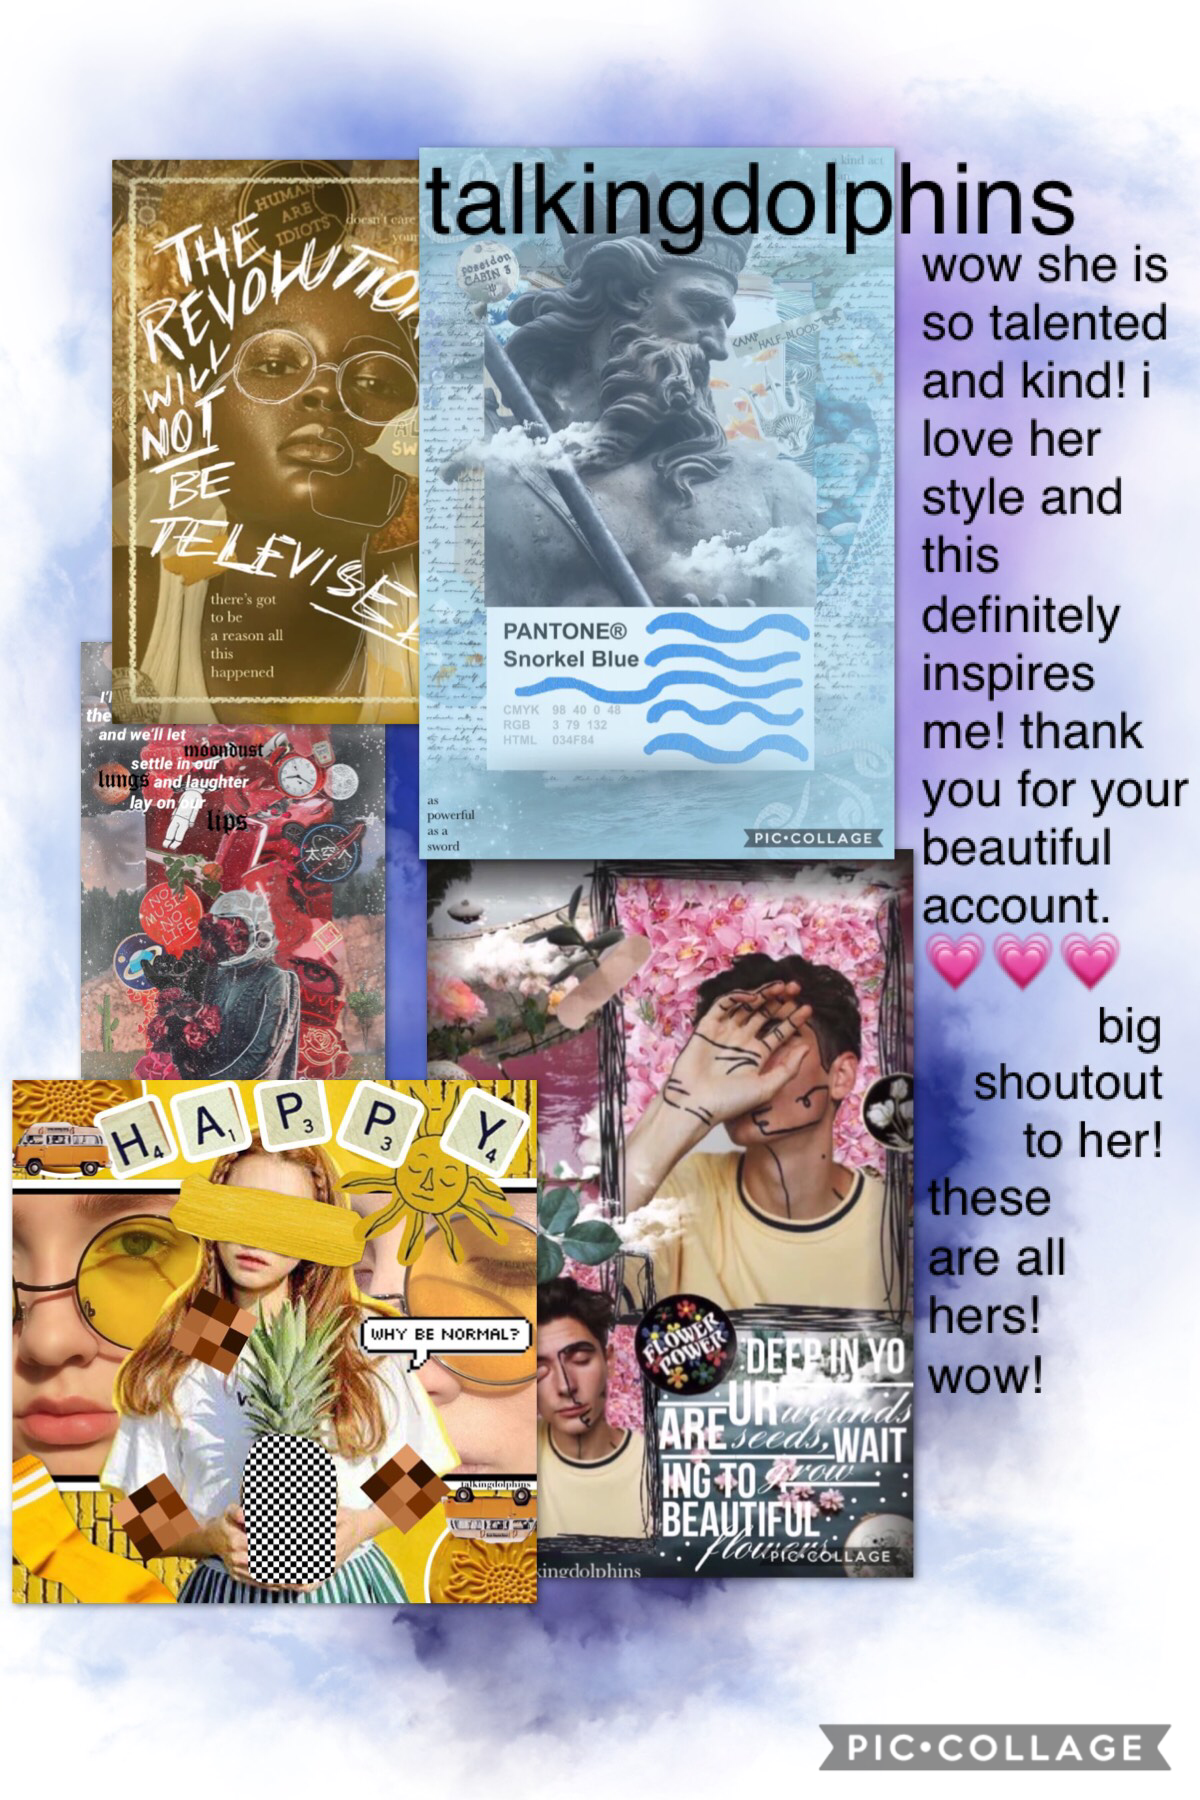 8/6/18
SHOUTOUT TO THE AMAZING talkingdolphins!!
I love all of her collages so much and I can’t wait for more of her collages!